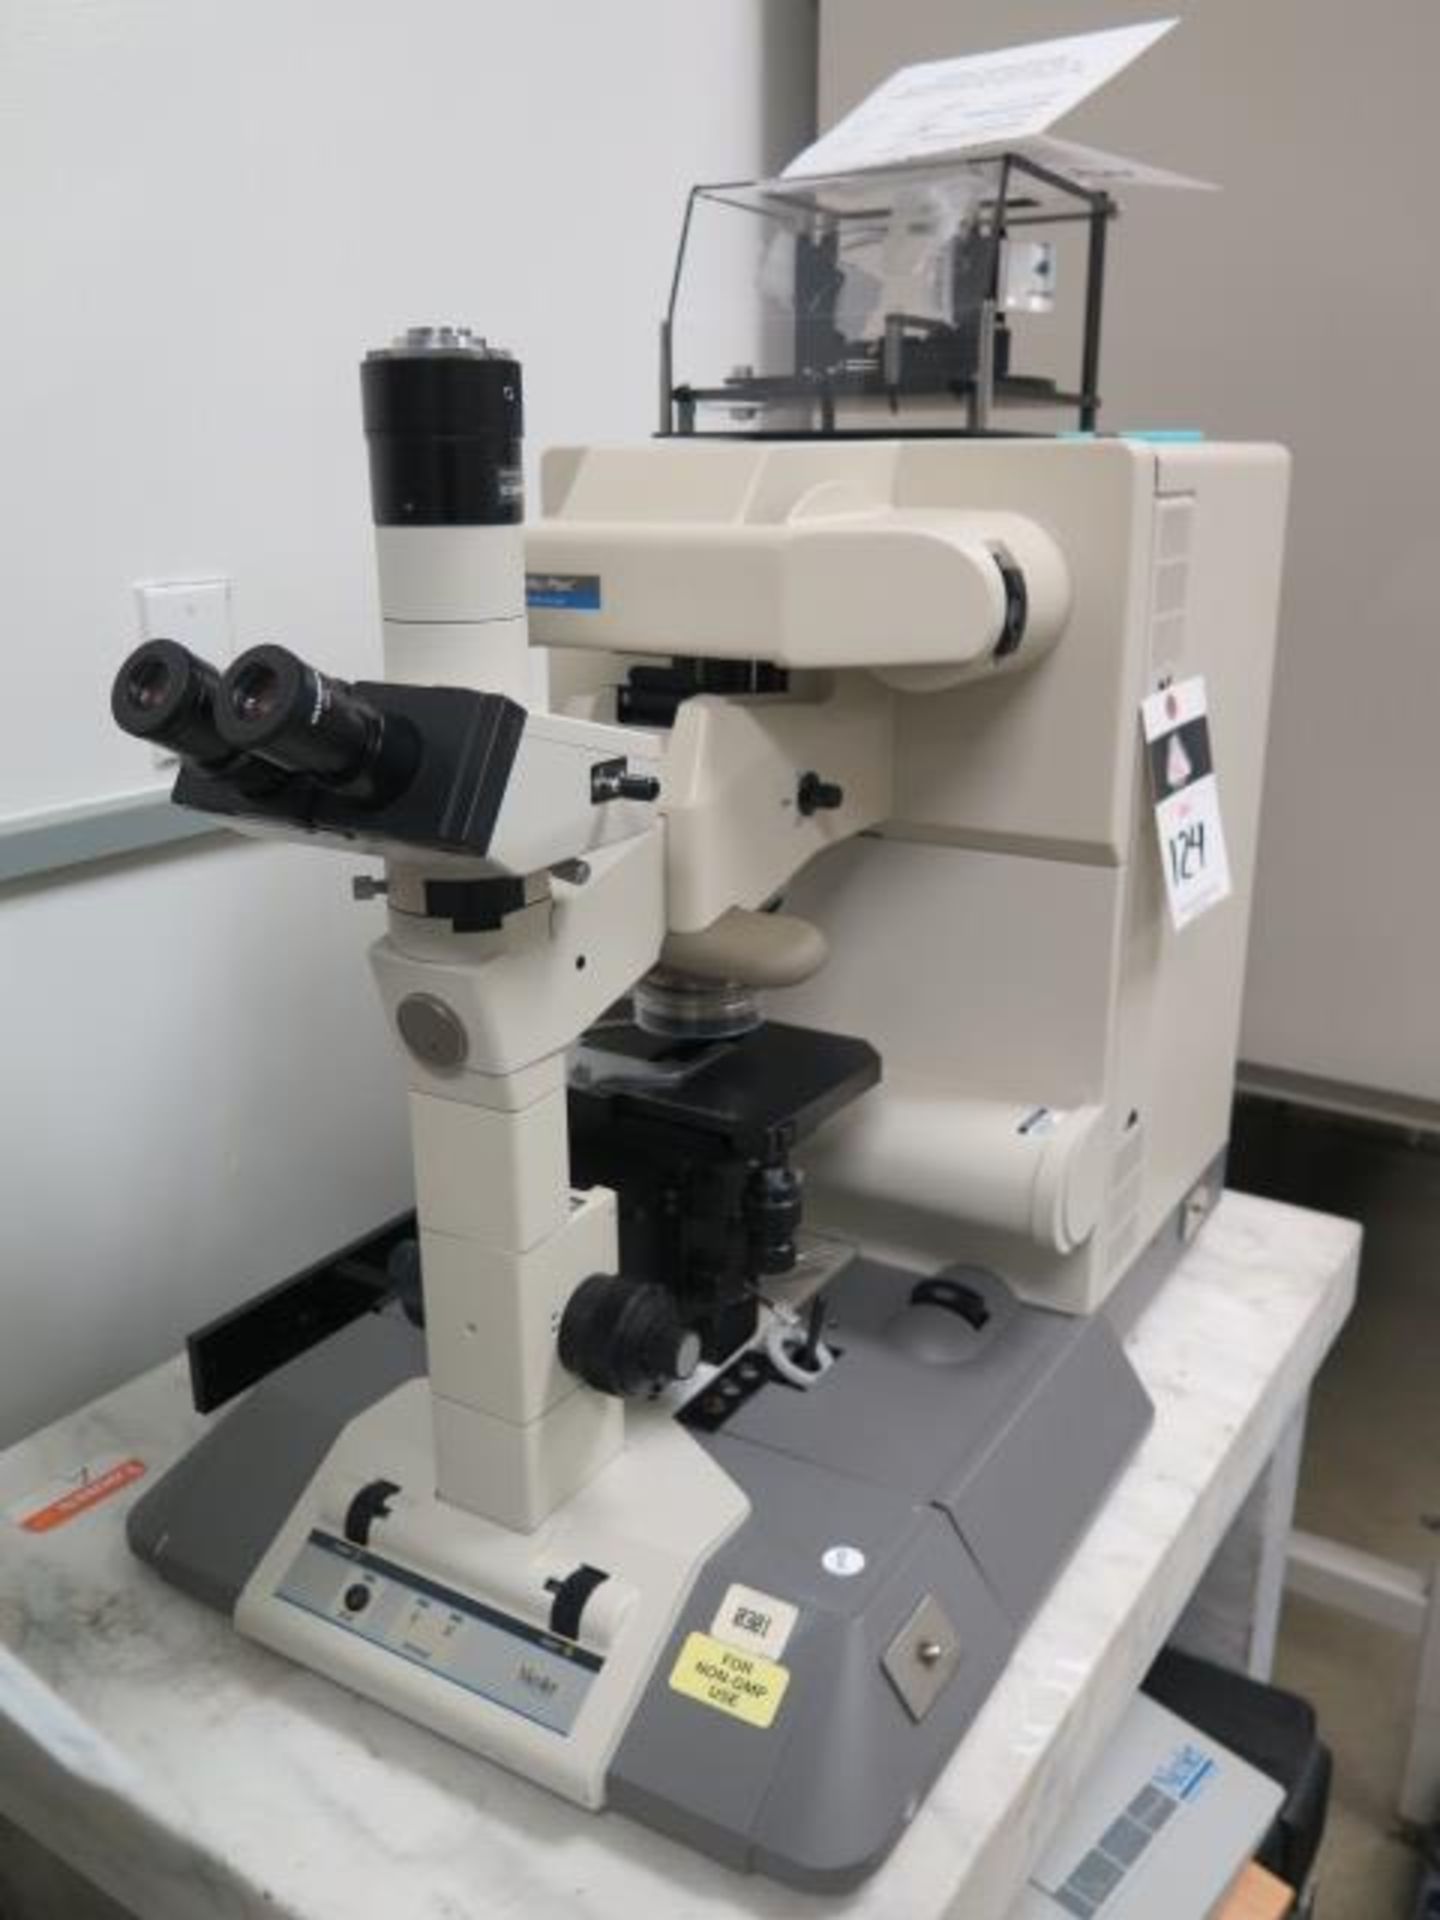 Nicolet “Nic-Plan” Infrared Microscope w/ Access (SOLD AS-IS - NO WARRANTY)